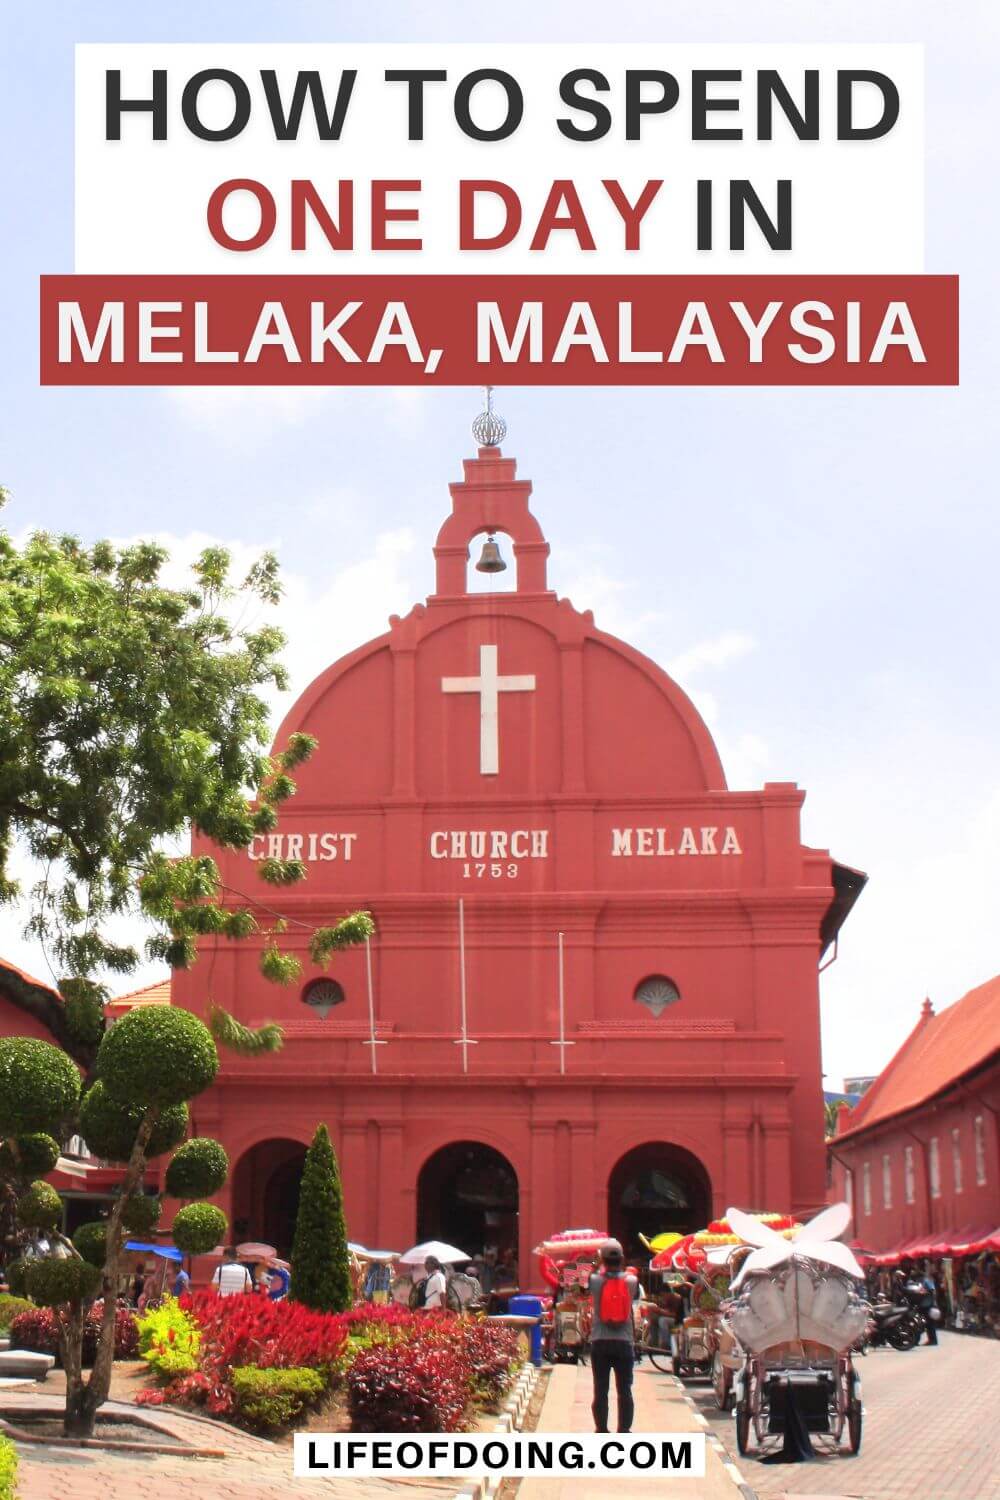 Tourists and trishaws parked in front of the red Christ Church Melaka, one of the attractions to visit in Melaka on a day trip